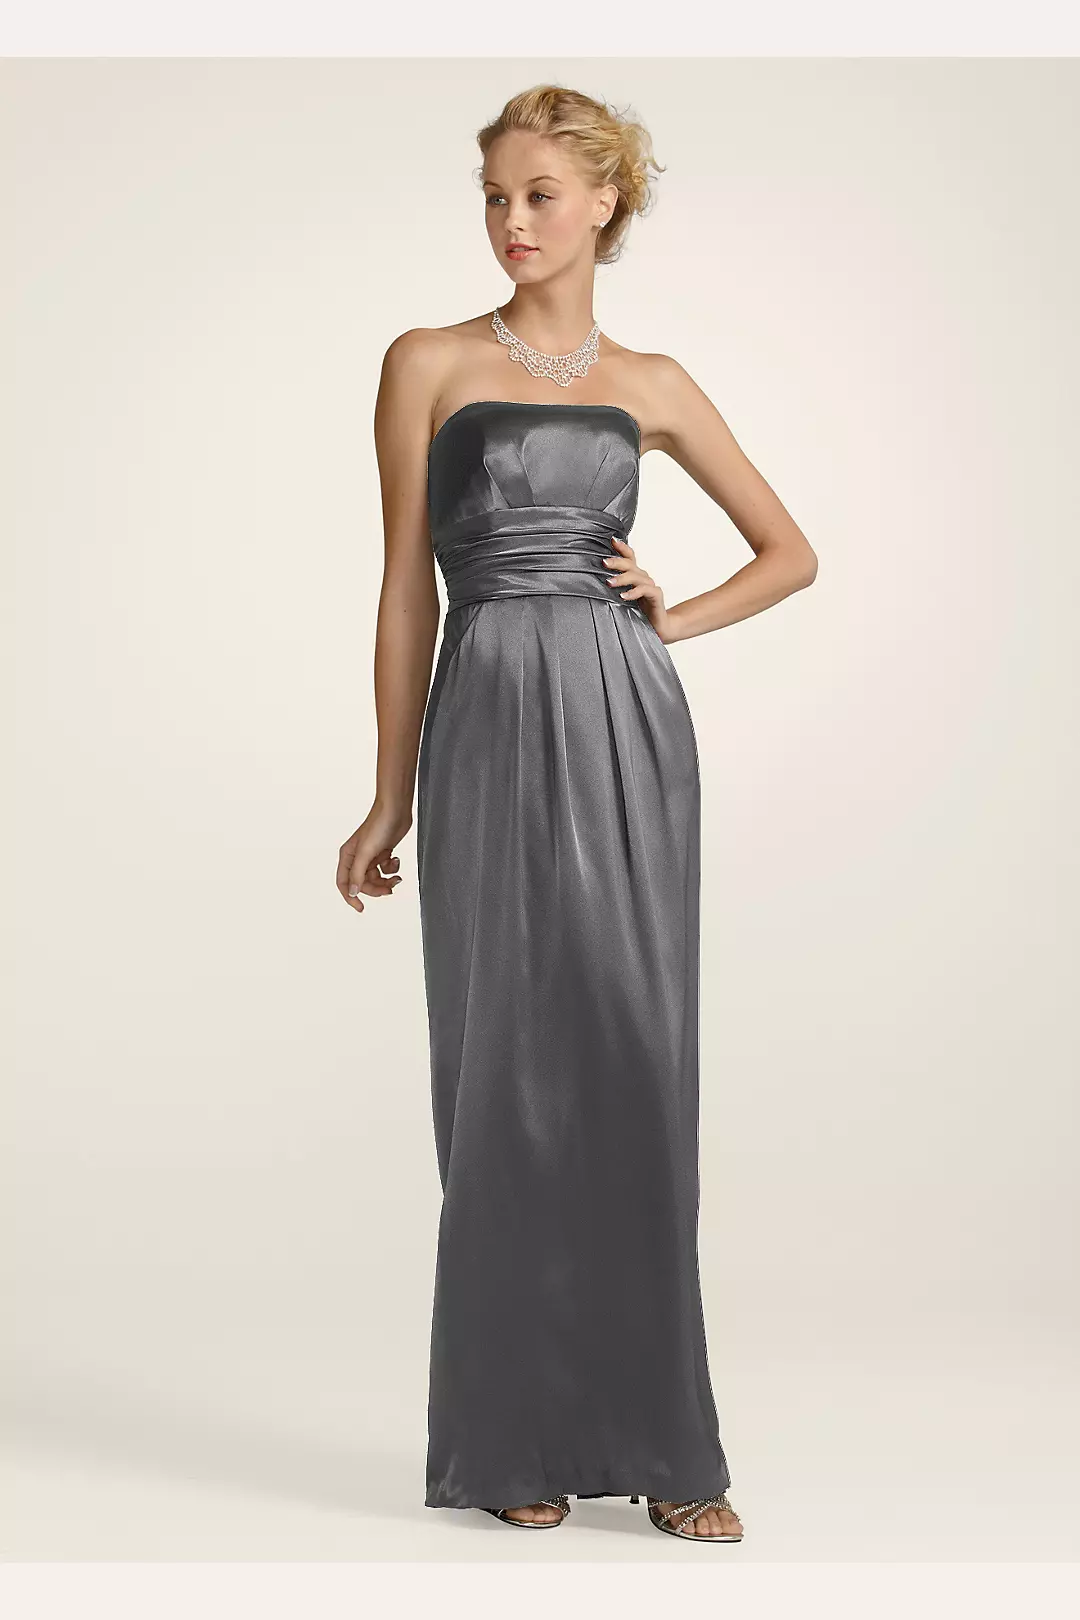 Strapless Slim Charmeuse Gown with Ruched Waist Image